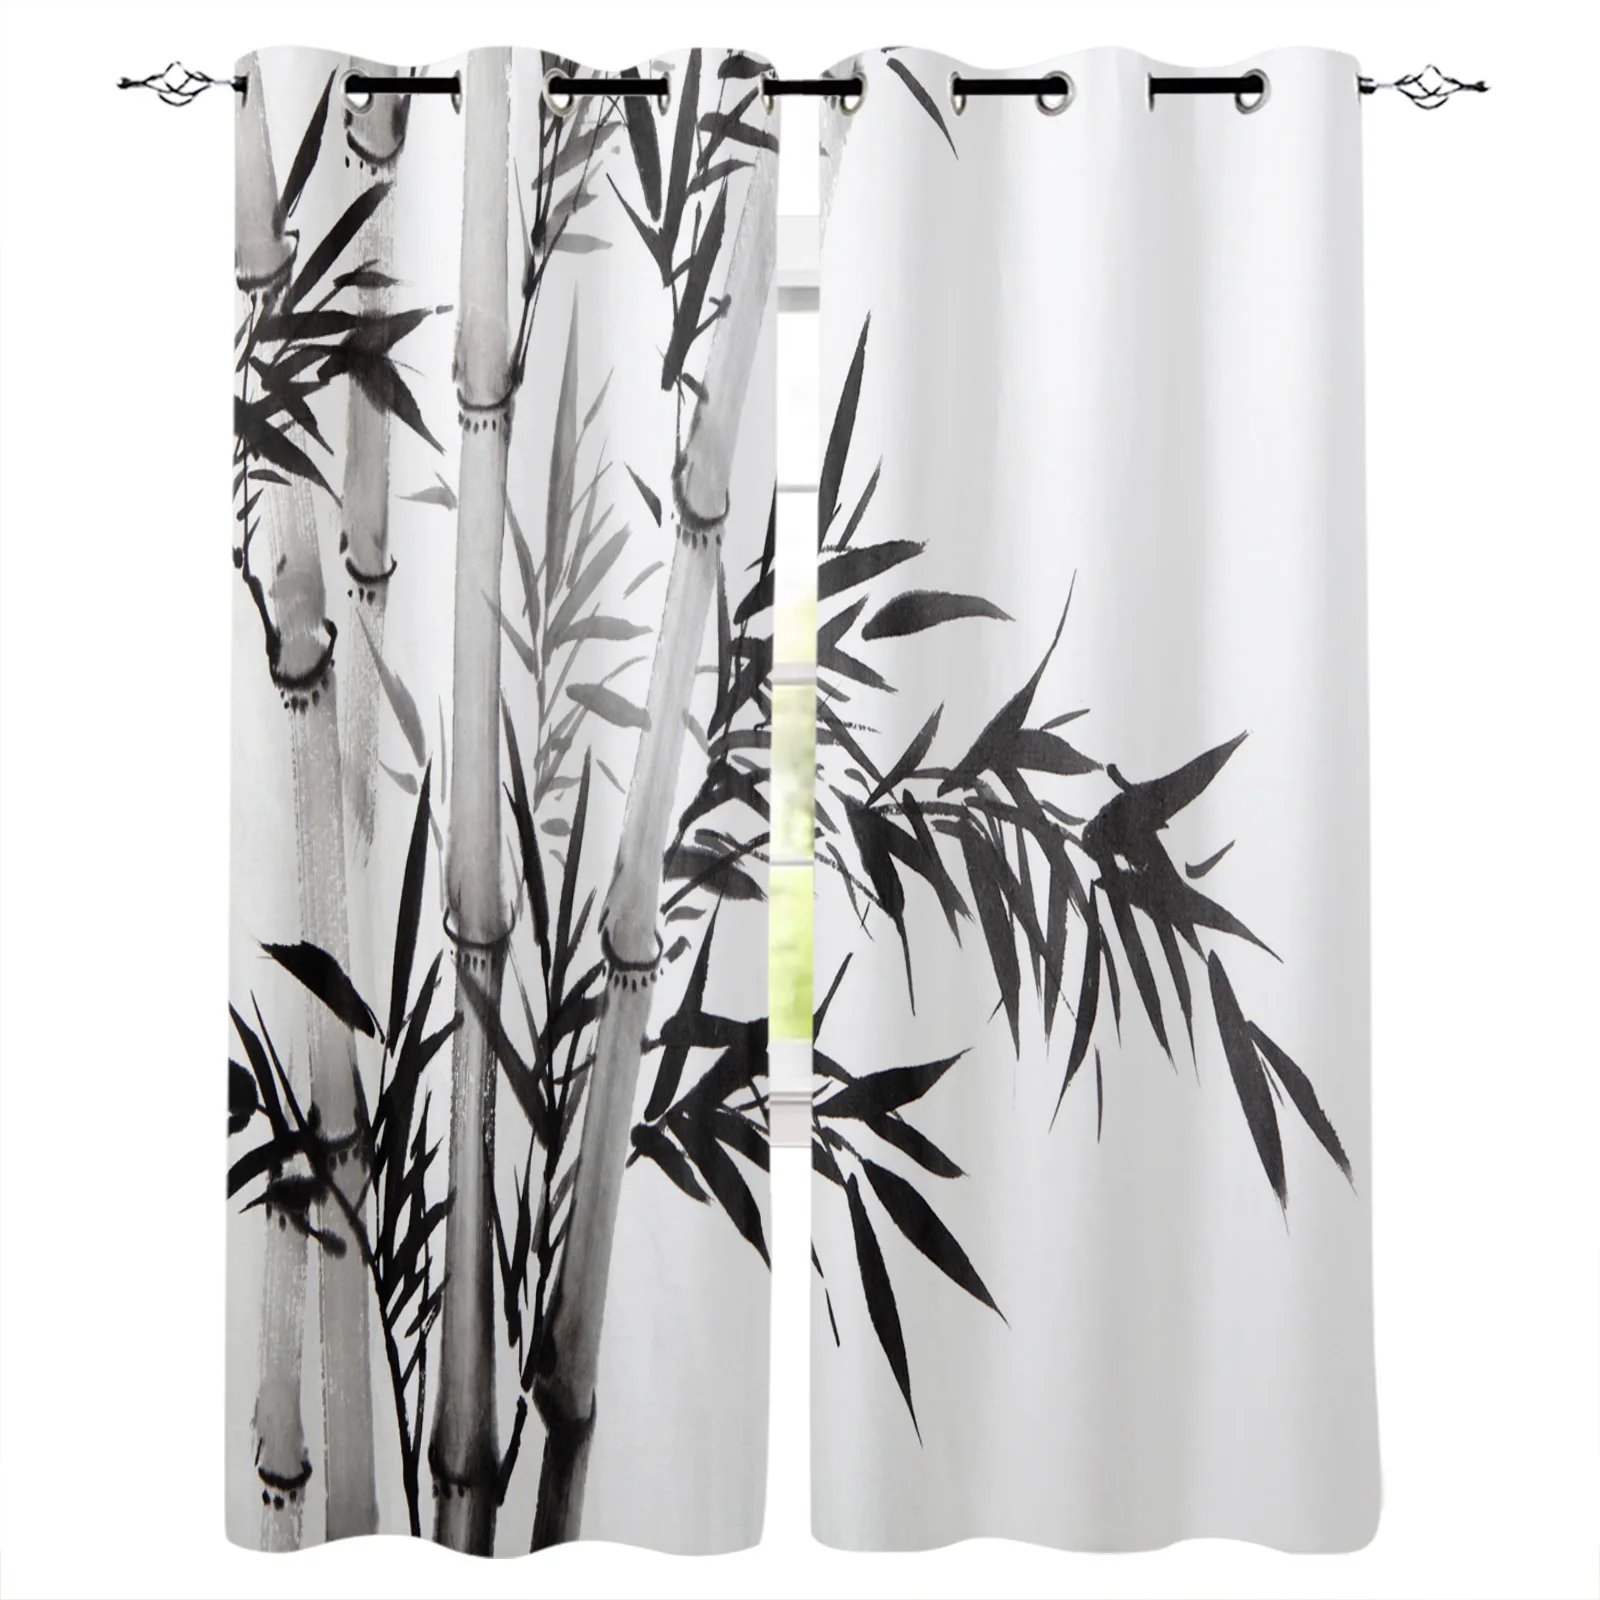 Bamboo Forest Printed Blackout Curtains For Bedroom Window Curtains For Liv U6B7 